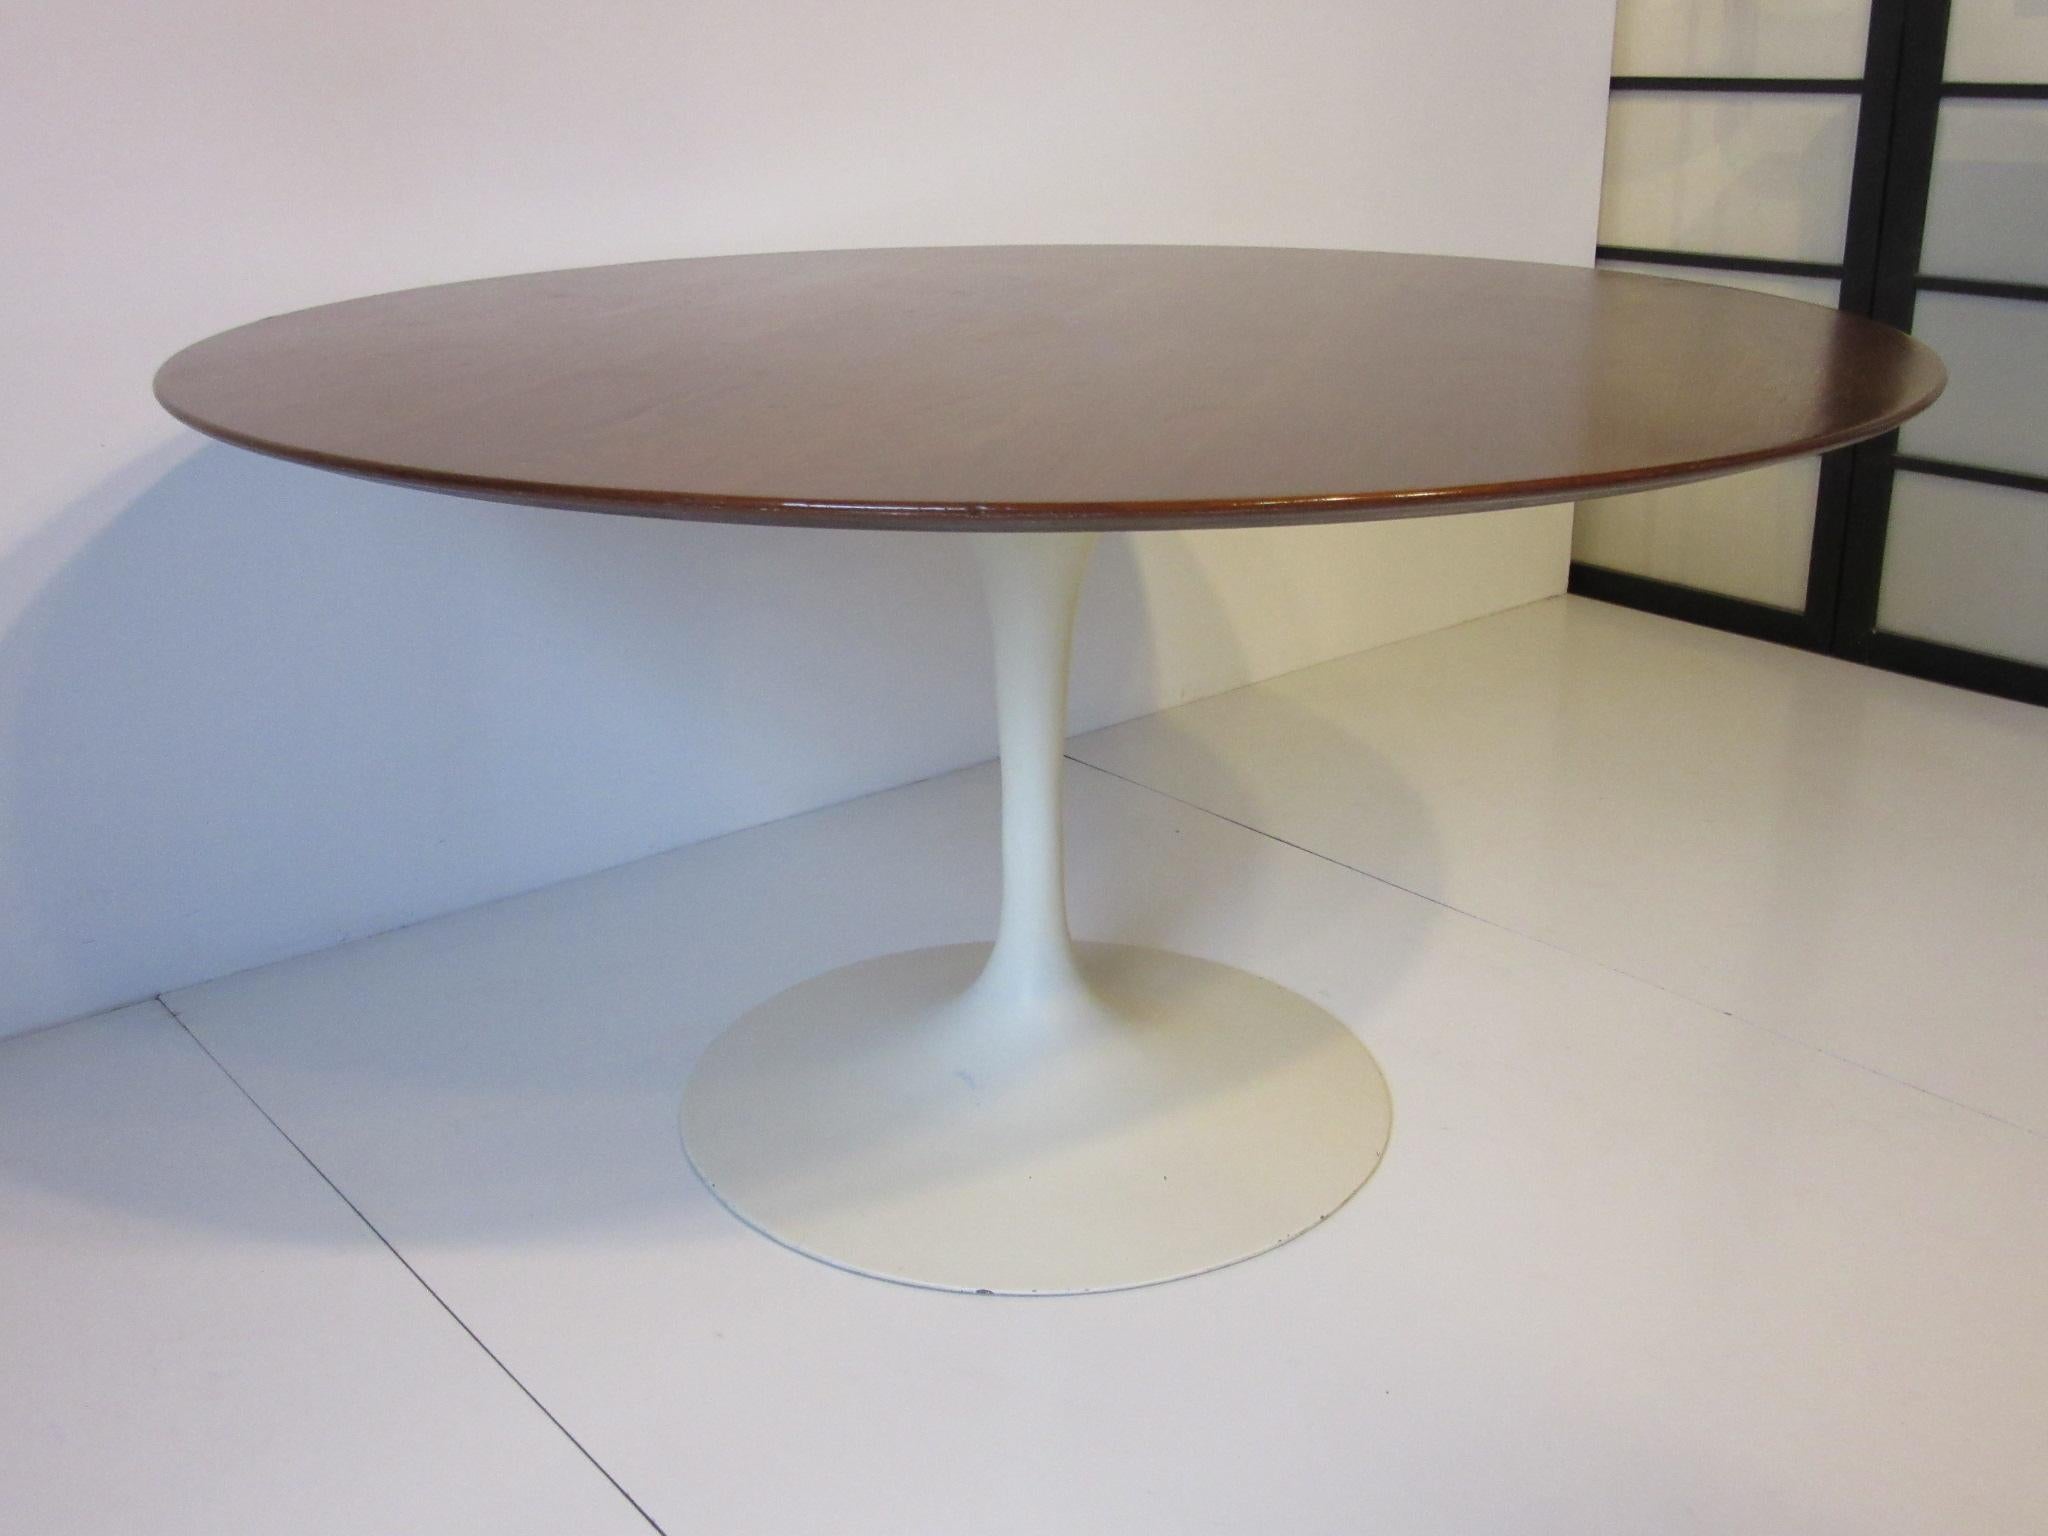 A well grained round walnut topped dining table with beveled edge and off white metal base, an earlier example that retains the original manufactures label to the bottom. Knoll Associates, Madison Ave. NY.